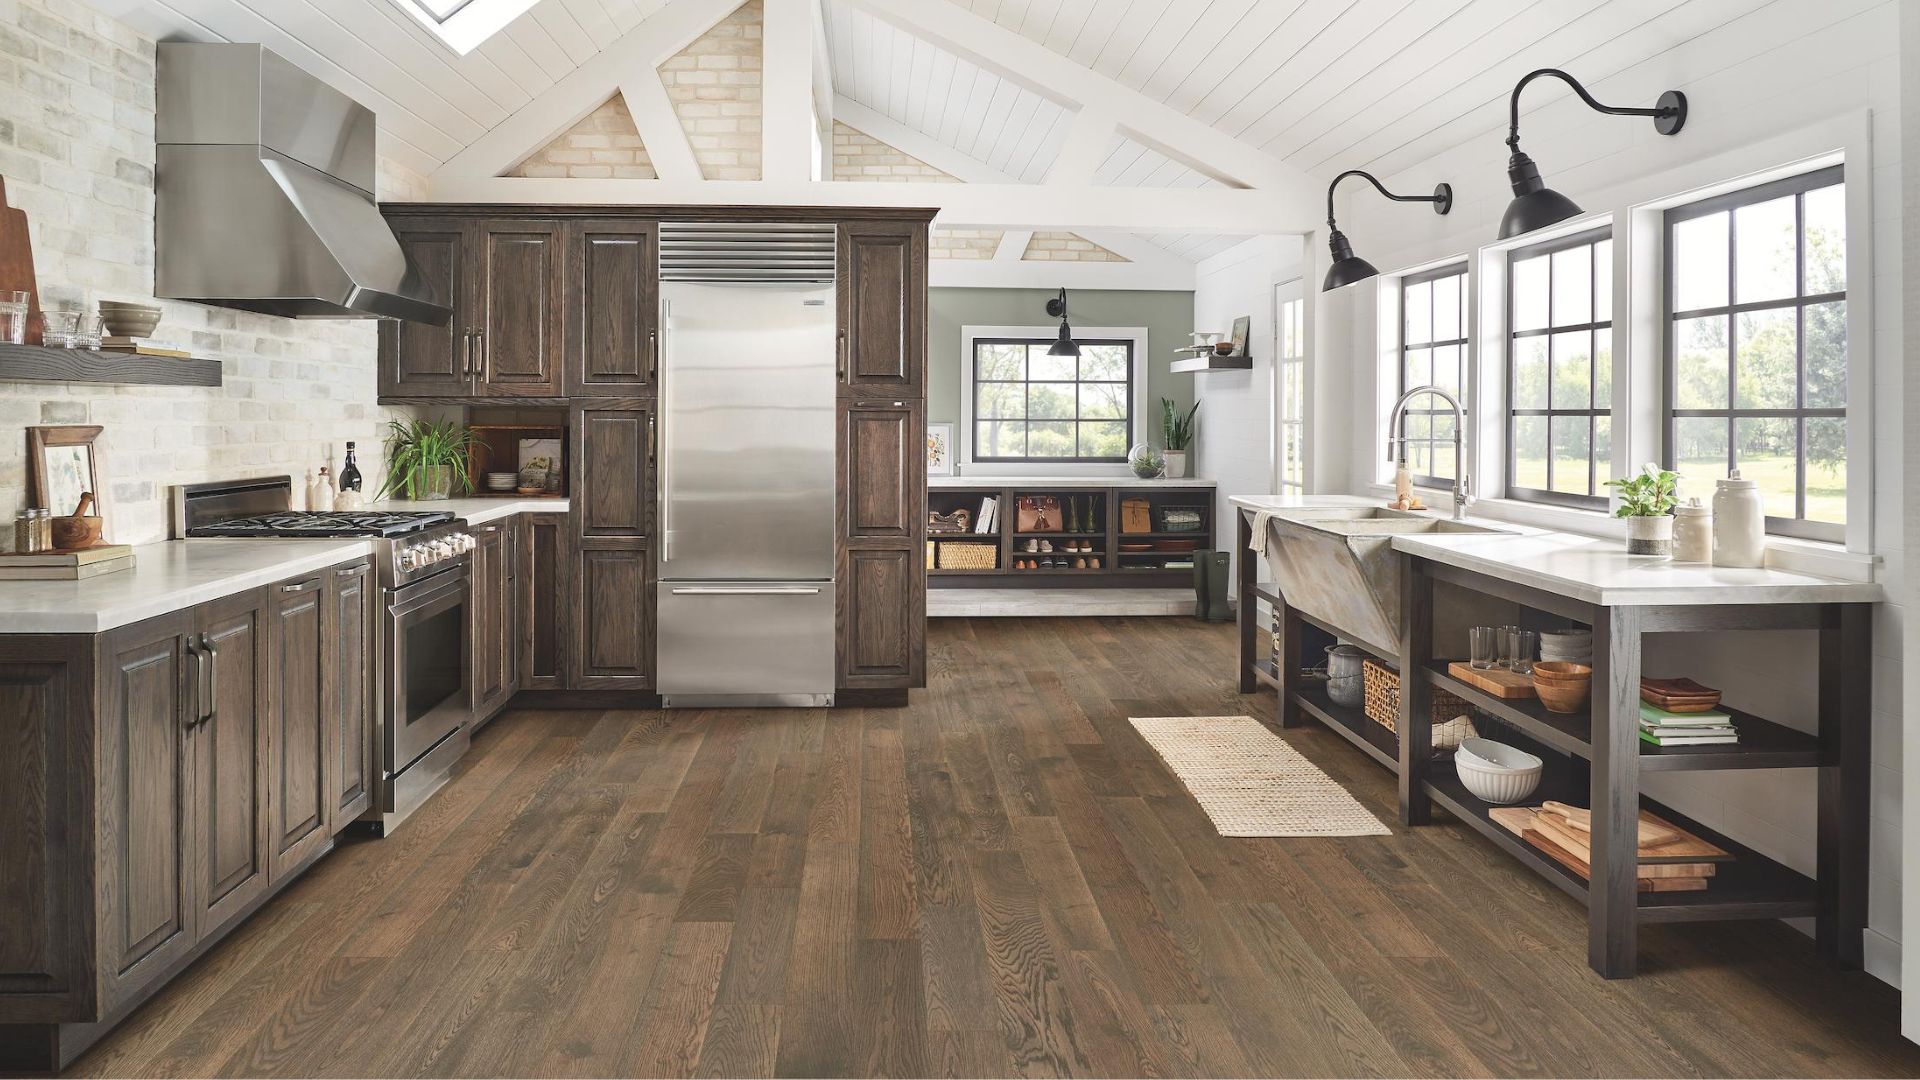 hardwood flooring in a bright rustic kitchen